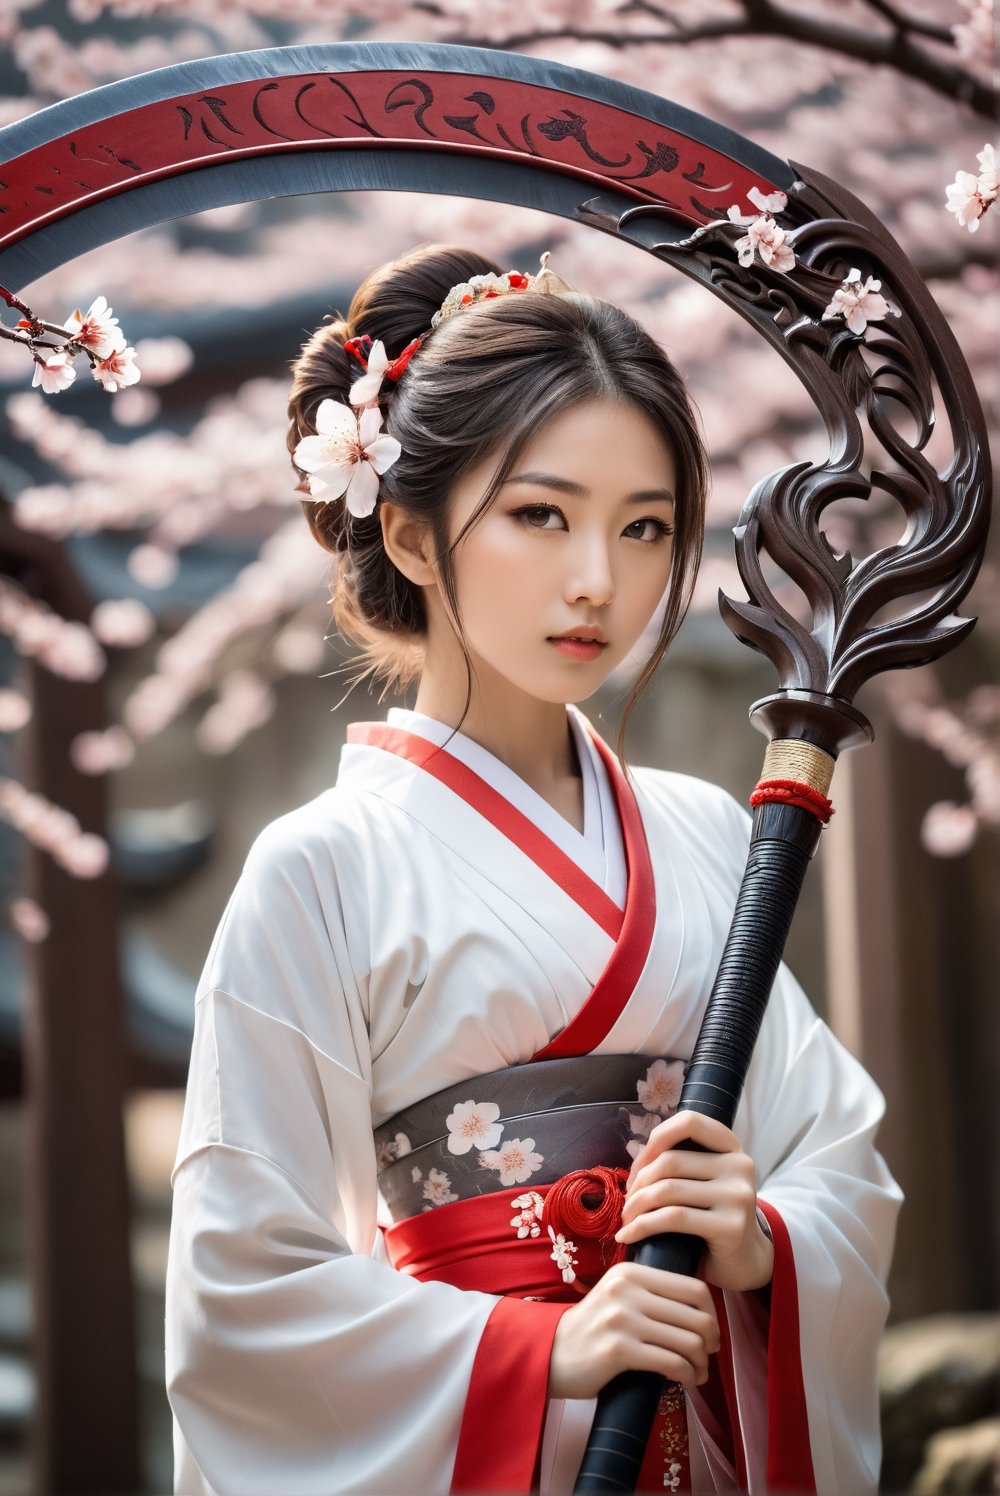 A young girl standing in the middle of a solemn shrine, a 15-years-old ethereal breathtakingly glamorous japanese idol holding a M5cy7h3XL scythe, cherry blossom, photo_b00ster, Don, ethereal beautiful face, detailed face, perfect face, perfect model body, single blade, award-winning photography, high-definition, exquisite red-white two-tone miko attire, addorned with necklace and bracelet